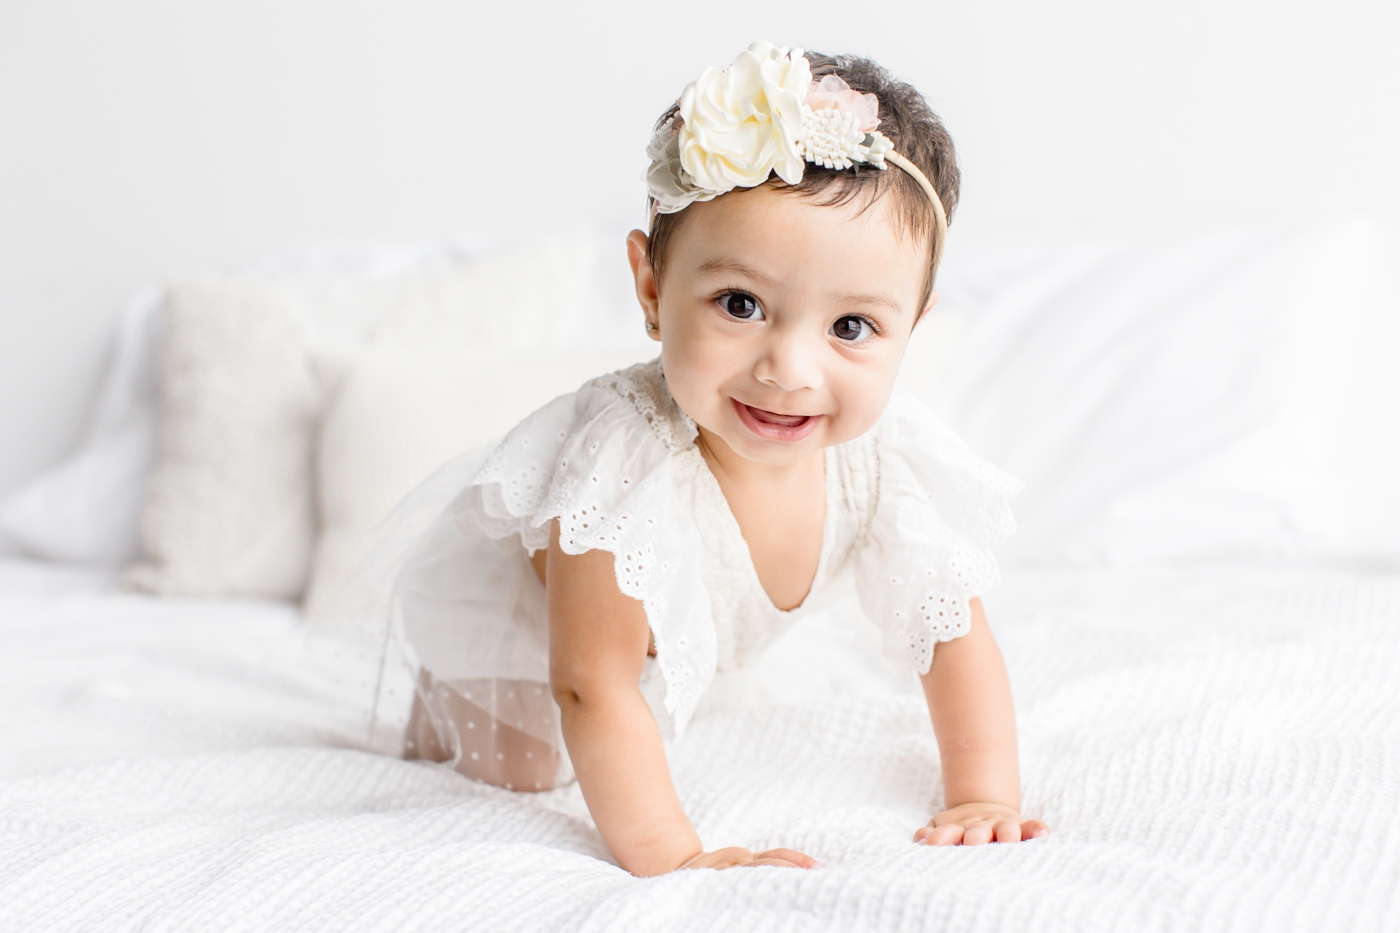 Baby girl smiling at camera and crawling on bed during 6 month milestone session. Photo by Sana Ahmed Photography.